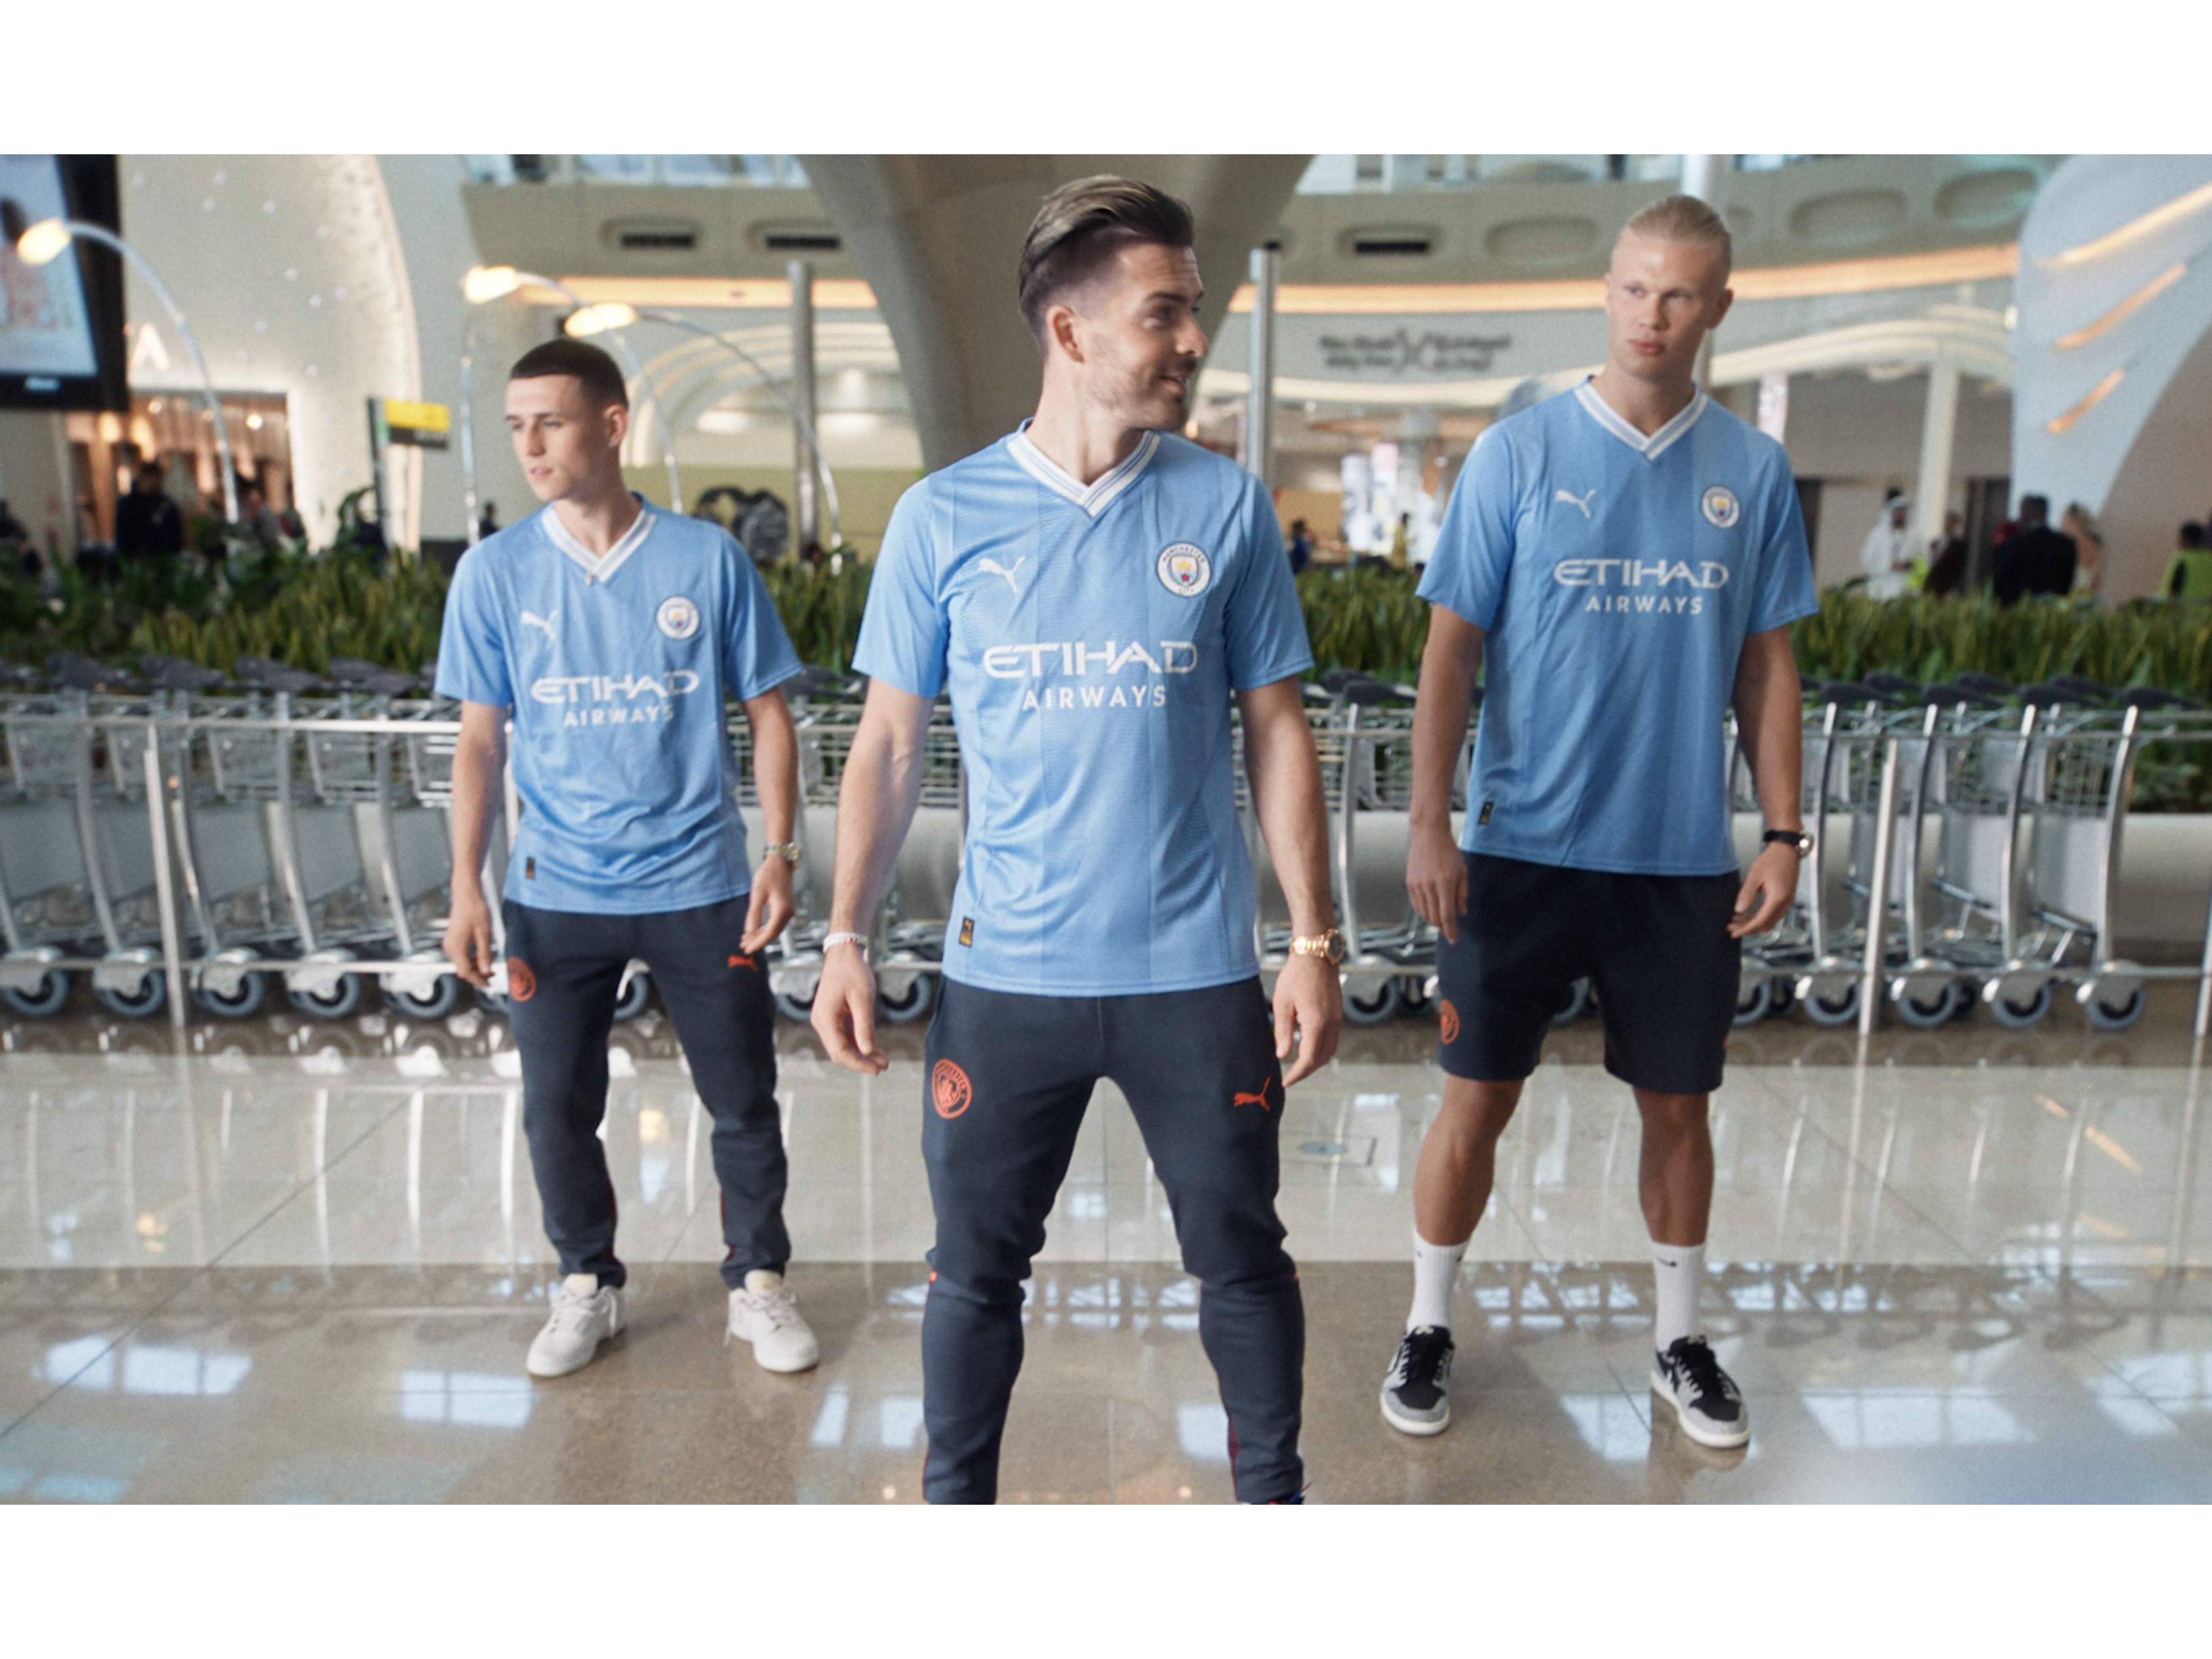 Man City players turn Etihad’s new terminal into a football pitch